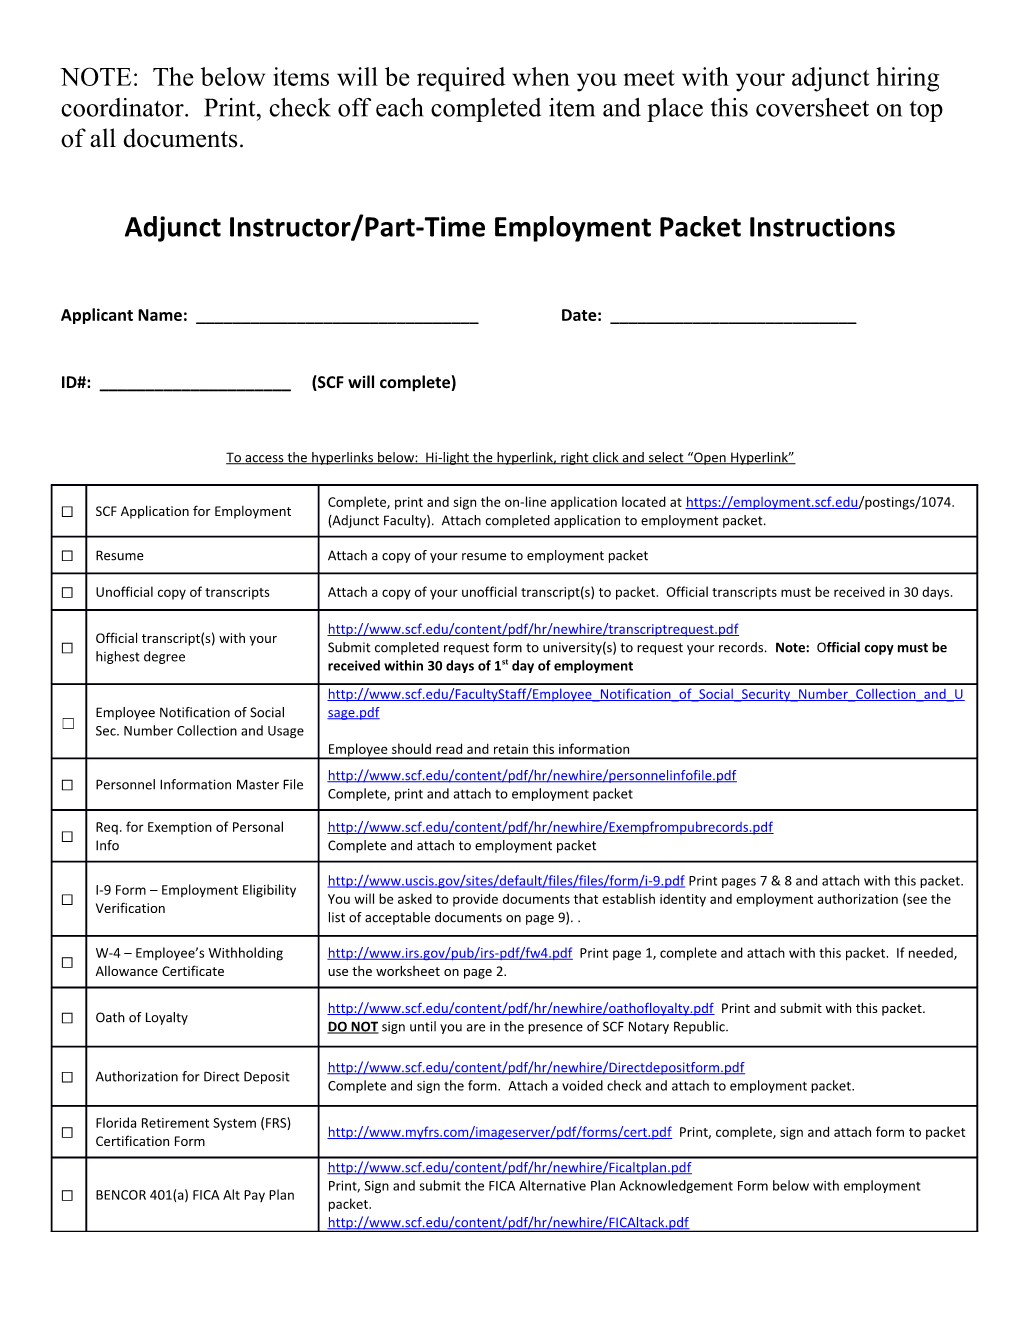 Adjunct Instructor/Part-Time Employment Packet Instructions